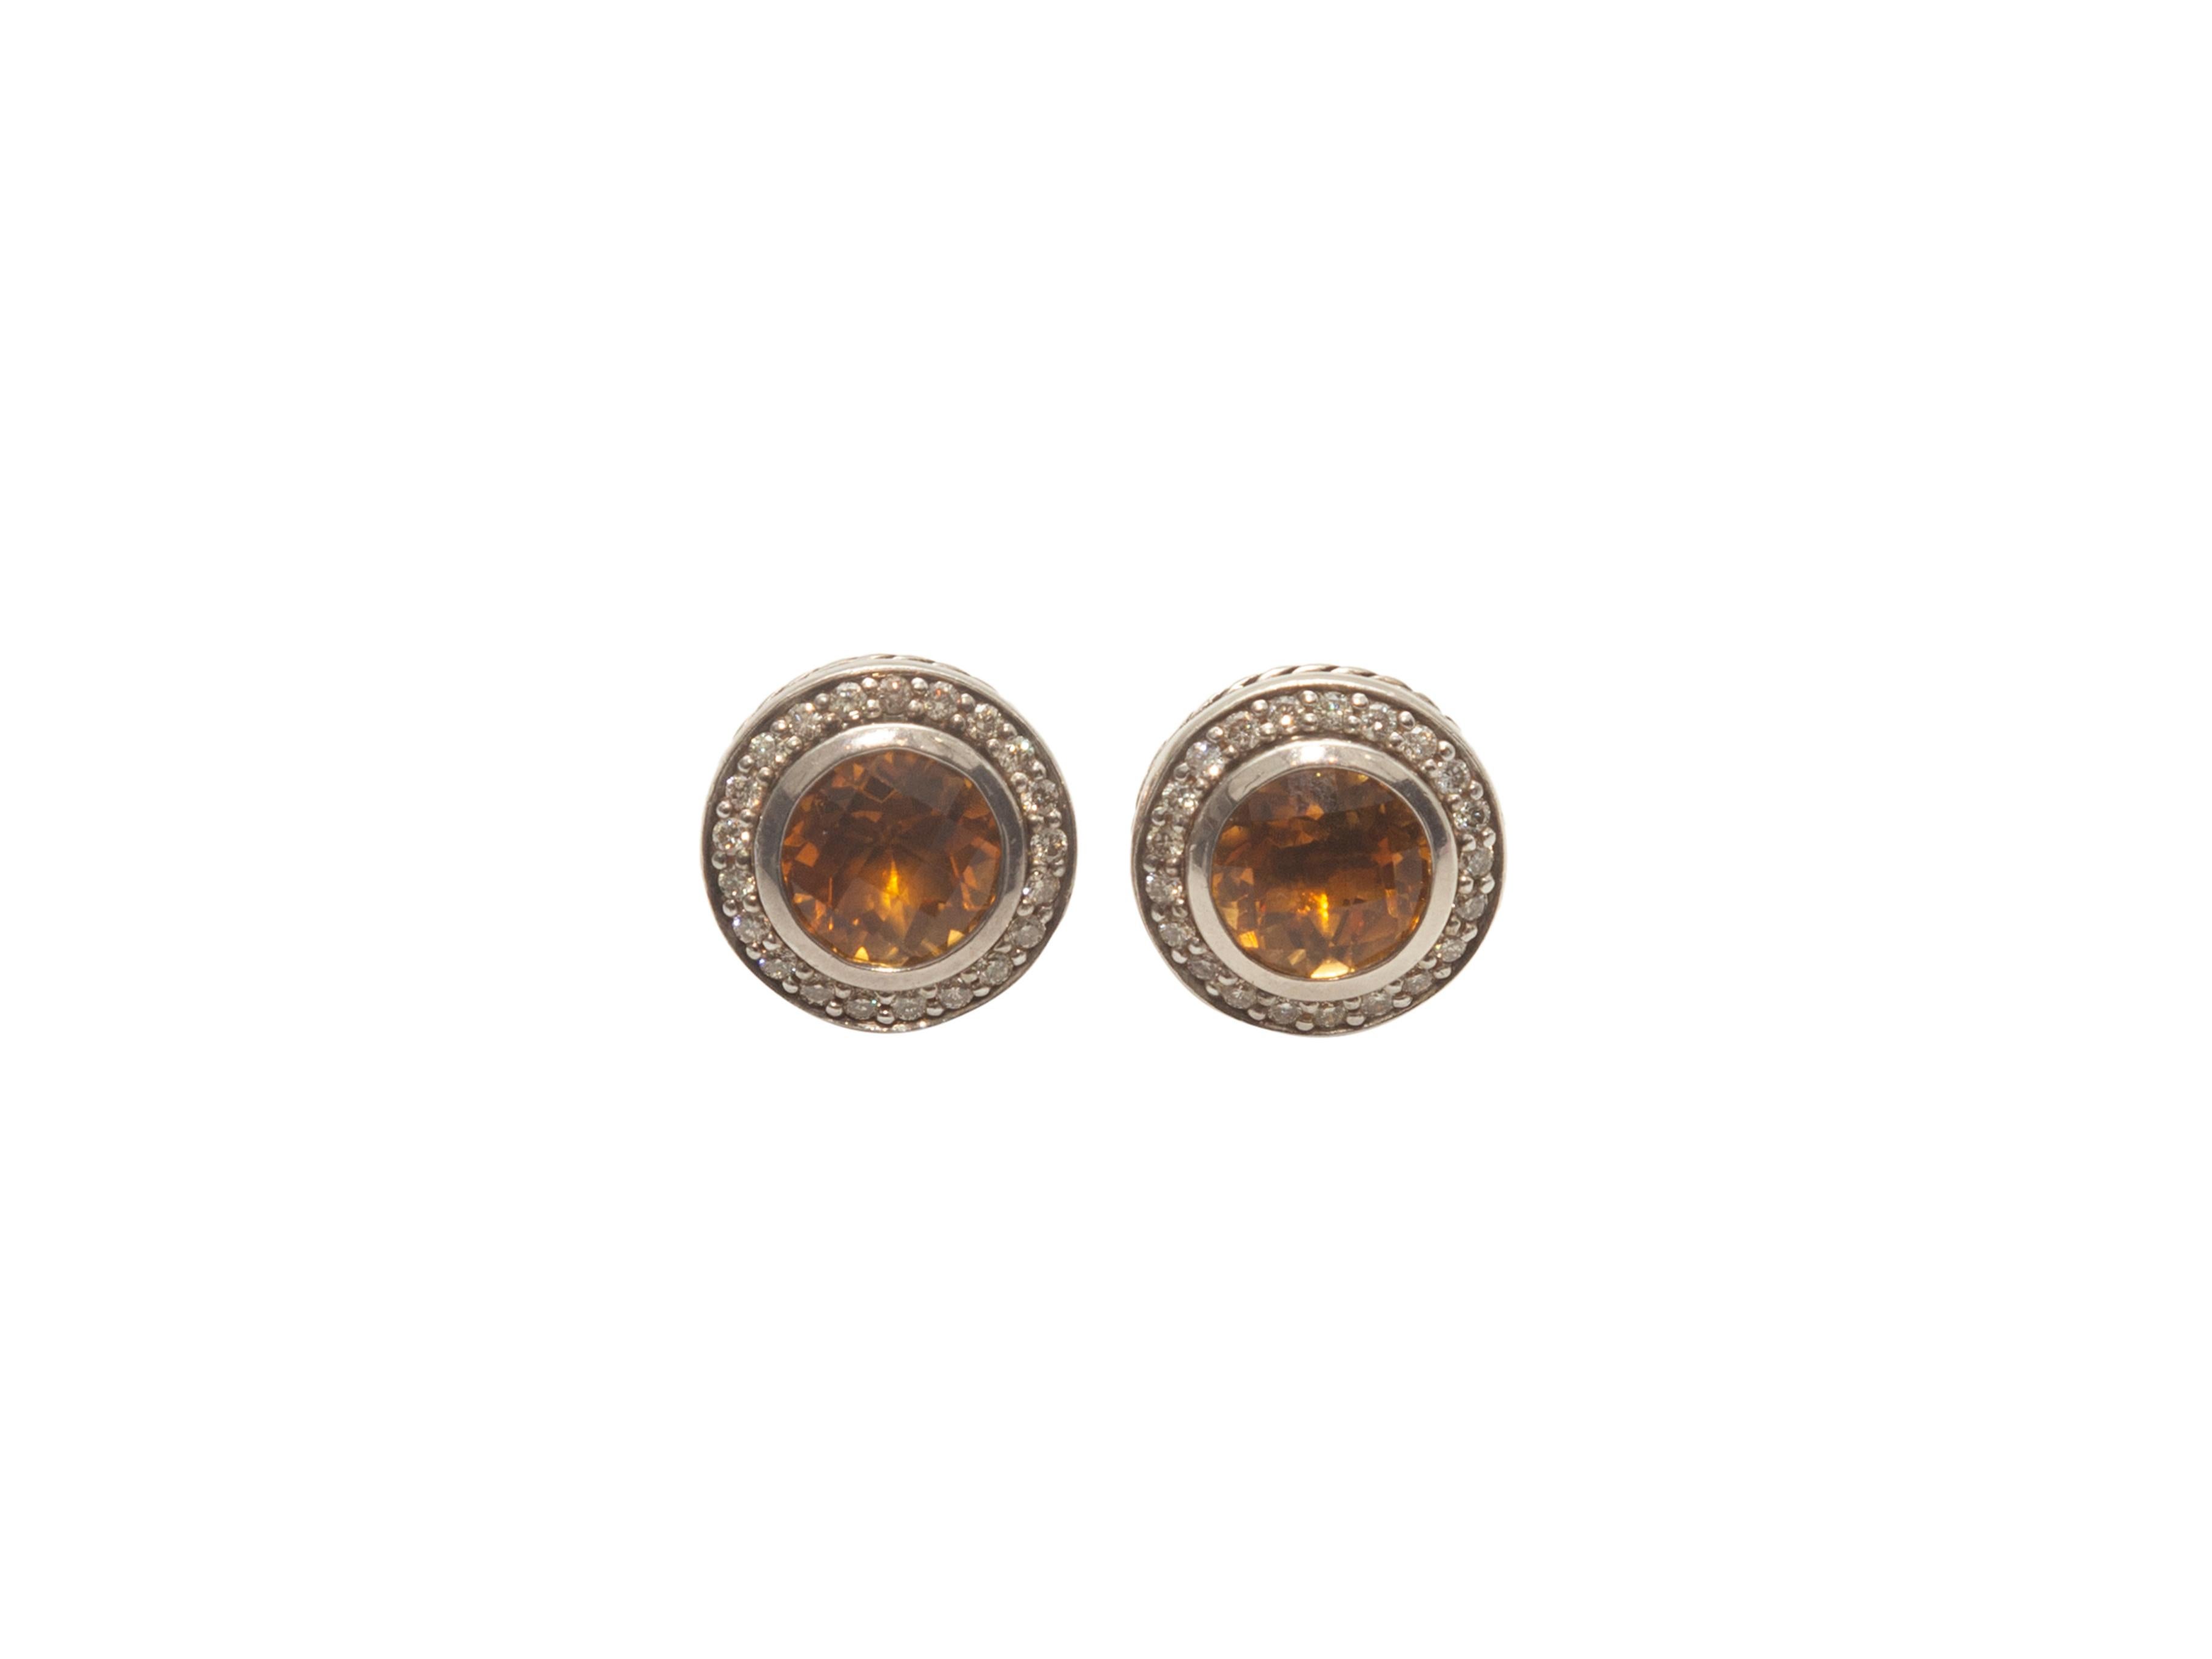 Product details: Citrine, diamond, and sterling silver stud earrings by David Yurman. 0.5